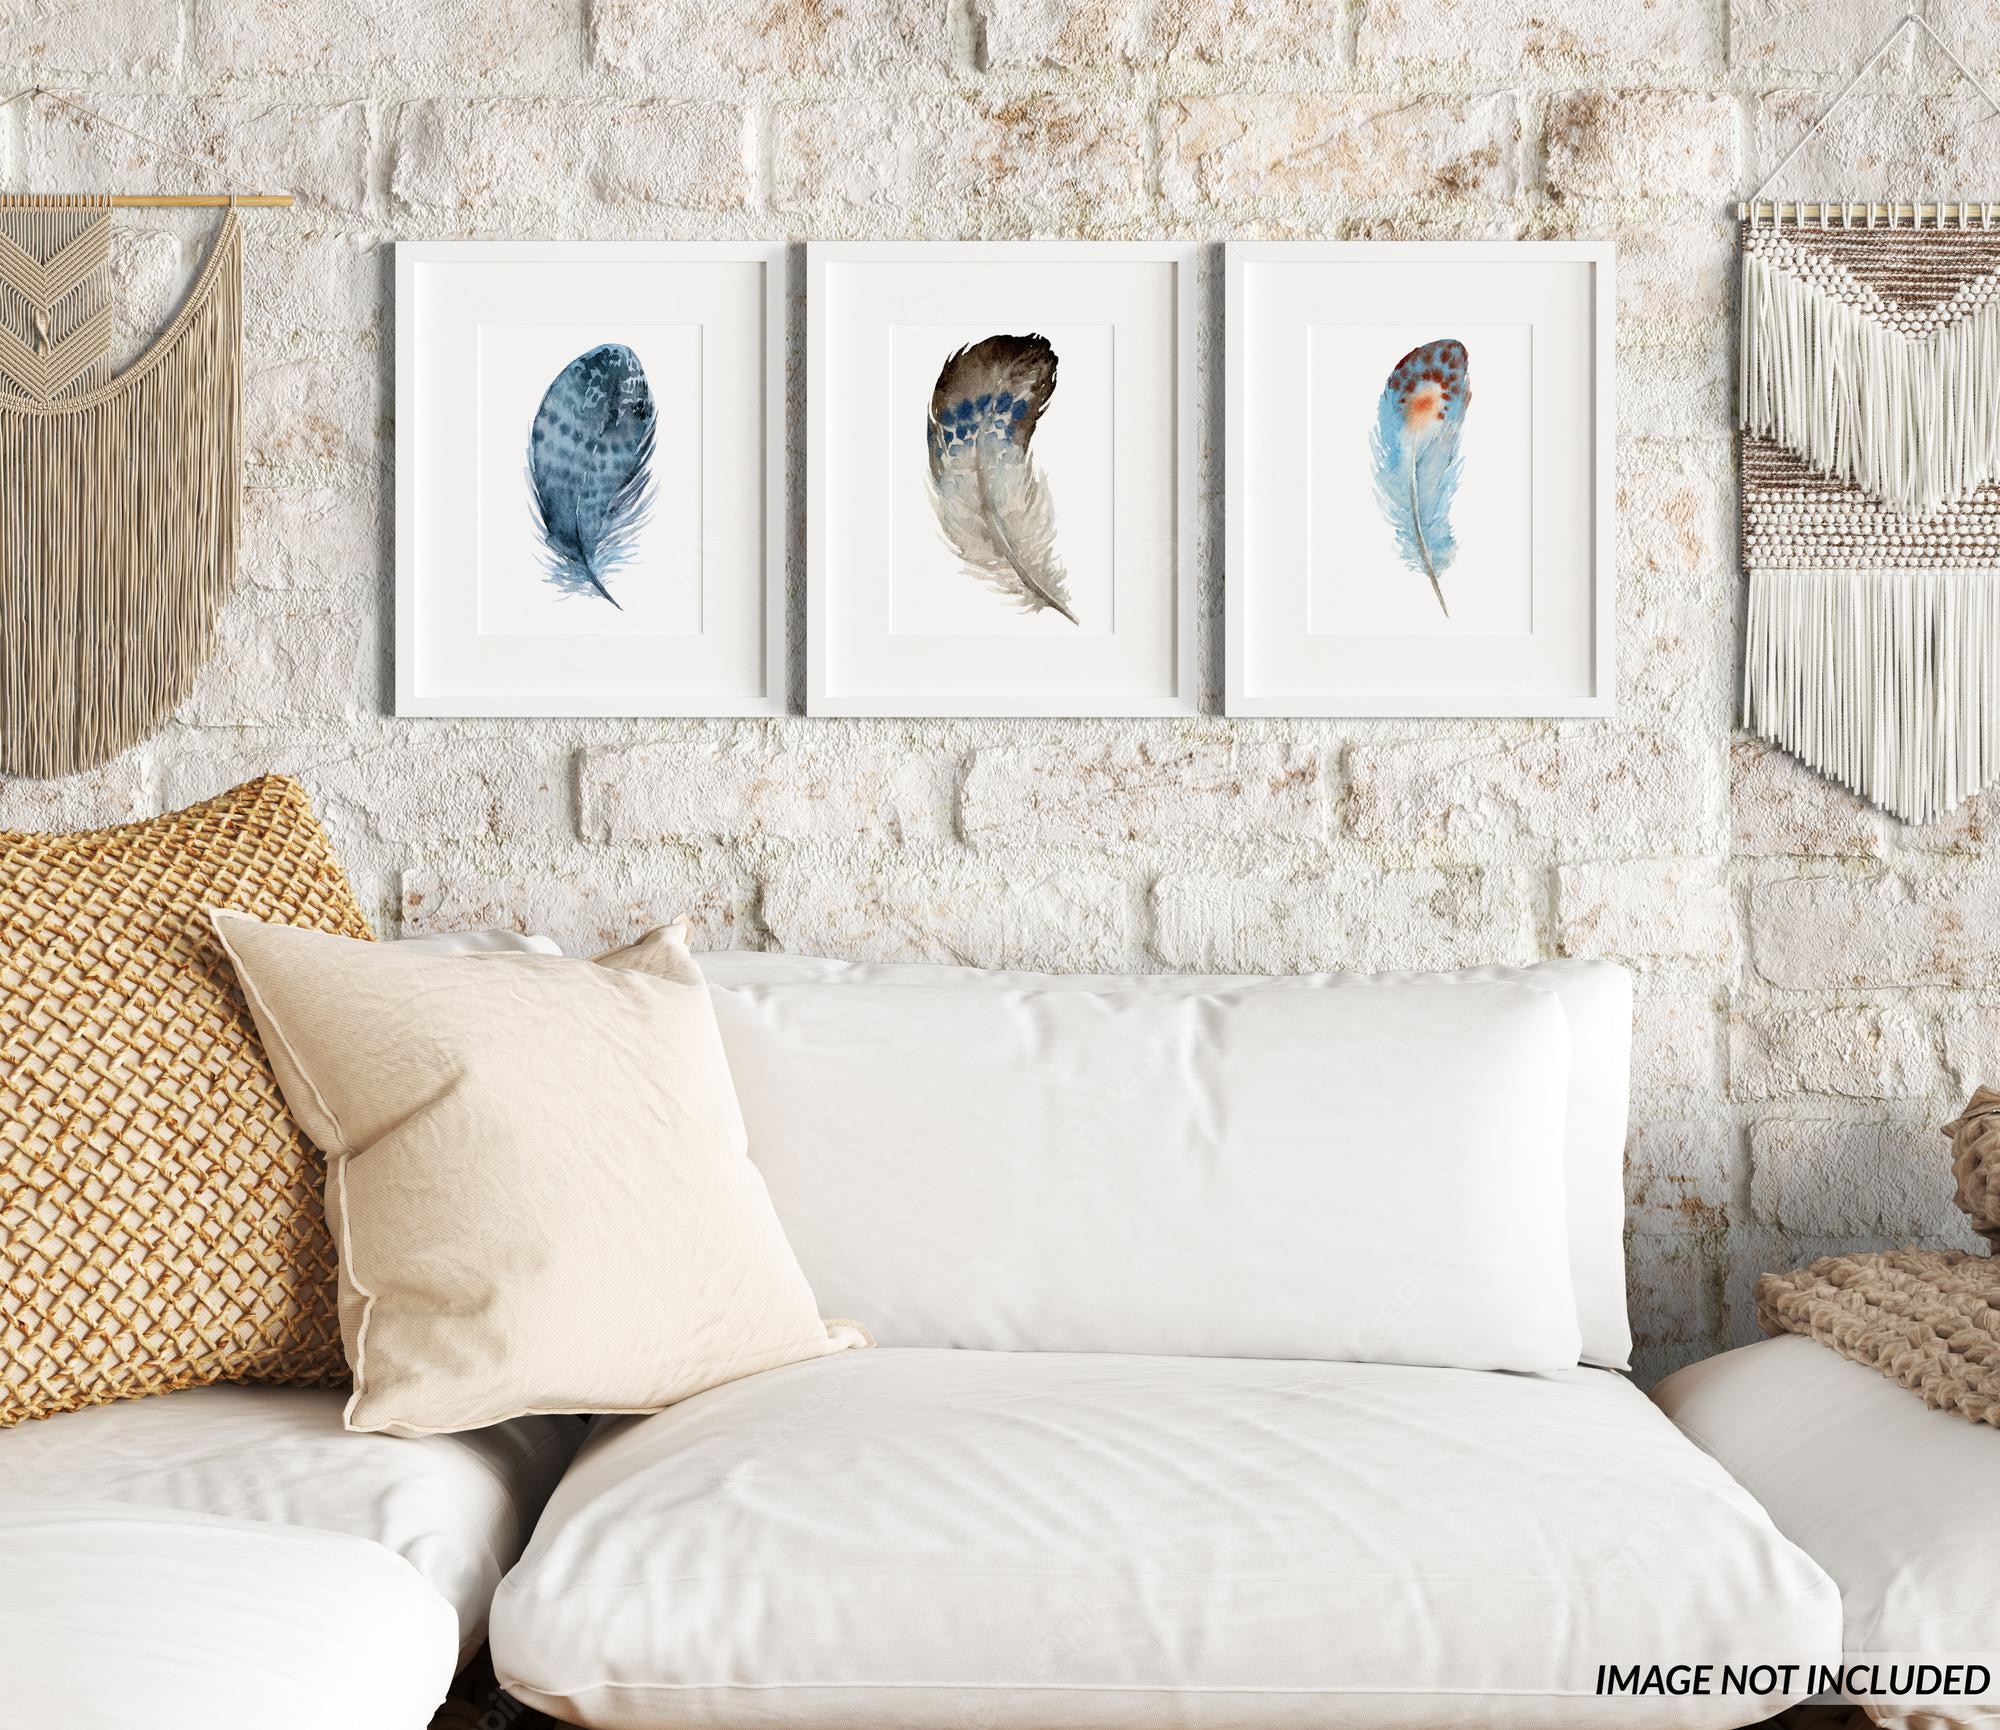 Wall Art Market to Grow at a CAGR of 5.6% from 2022 to 2031 Allied Market Research